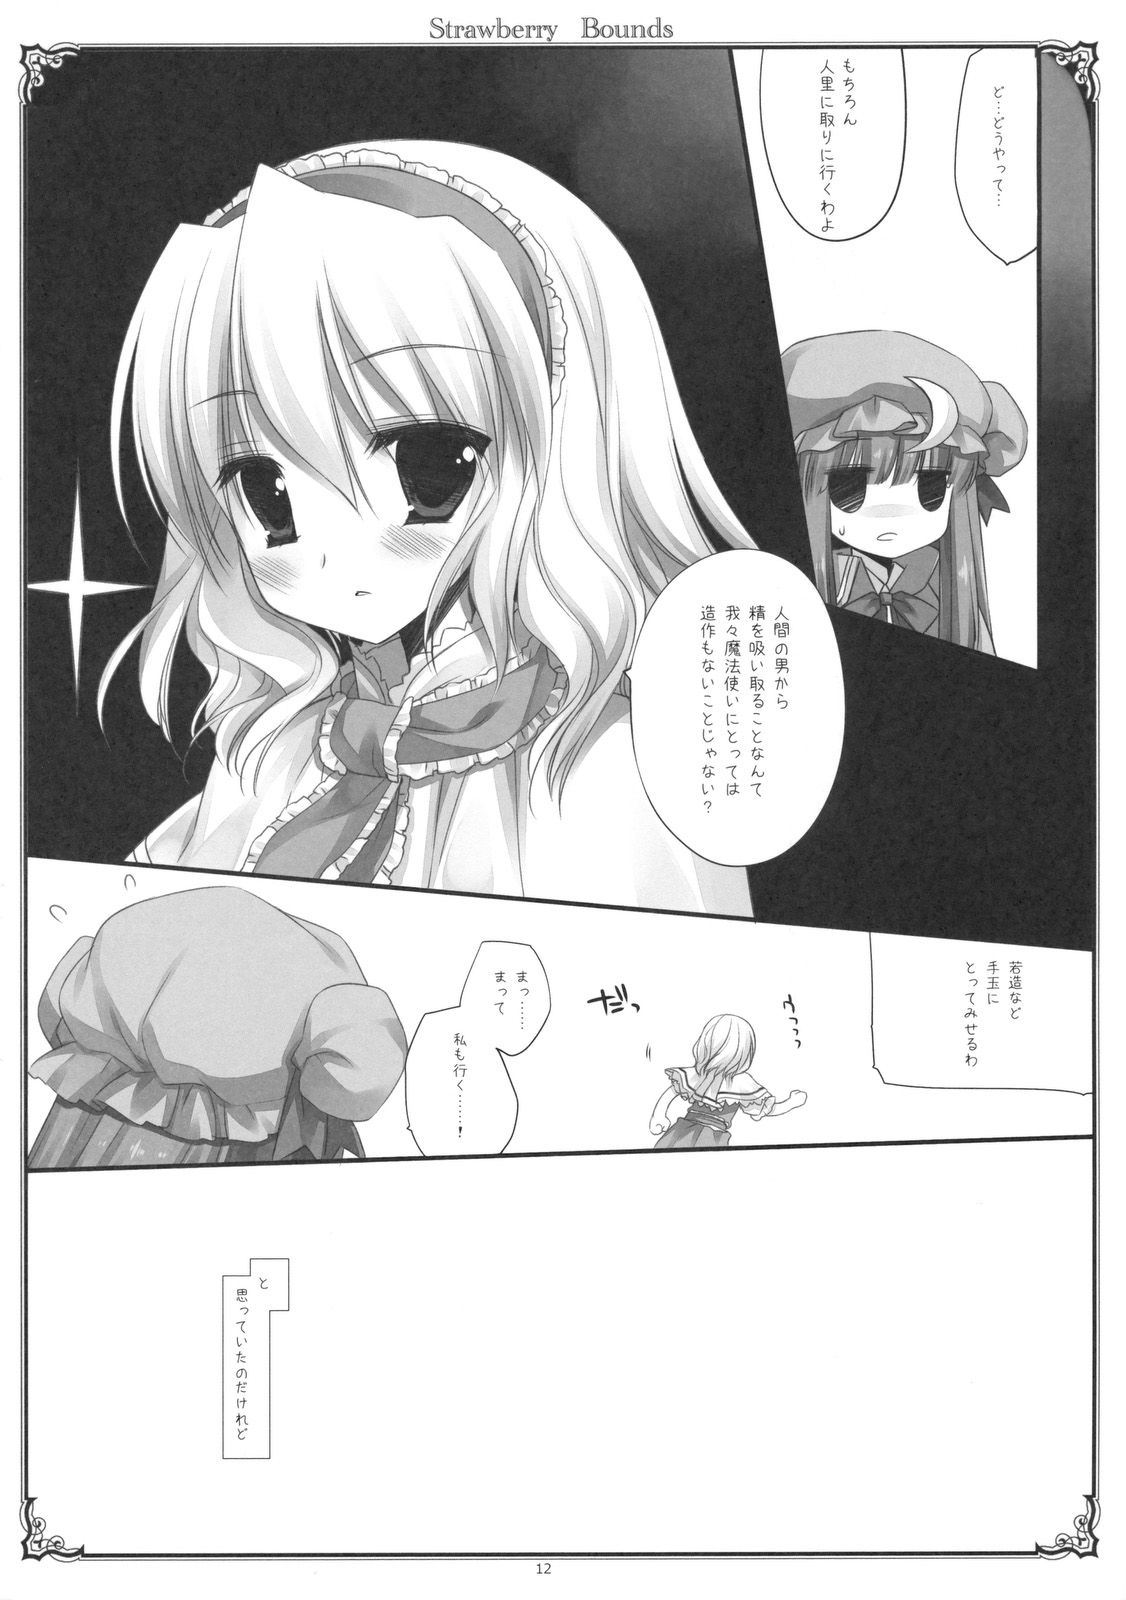 (C79) (同人誌) [D・N・A.Lab. (ミヤスリサ)] Strawberry Bounds (東方)